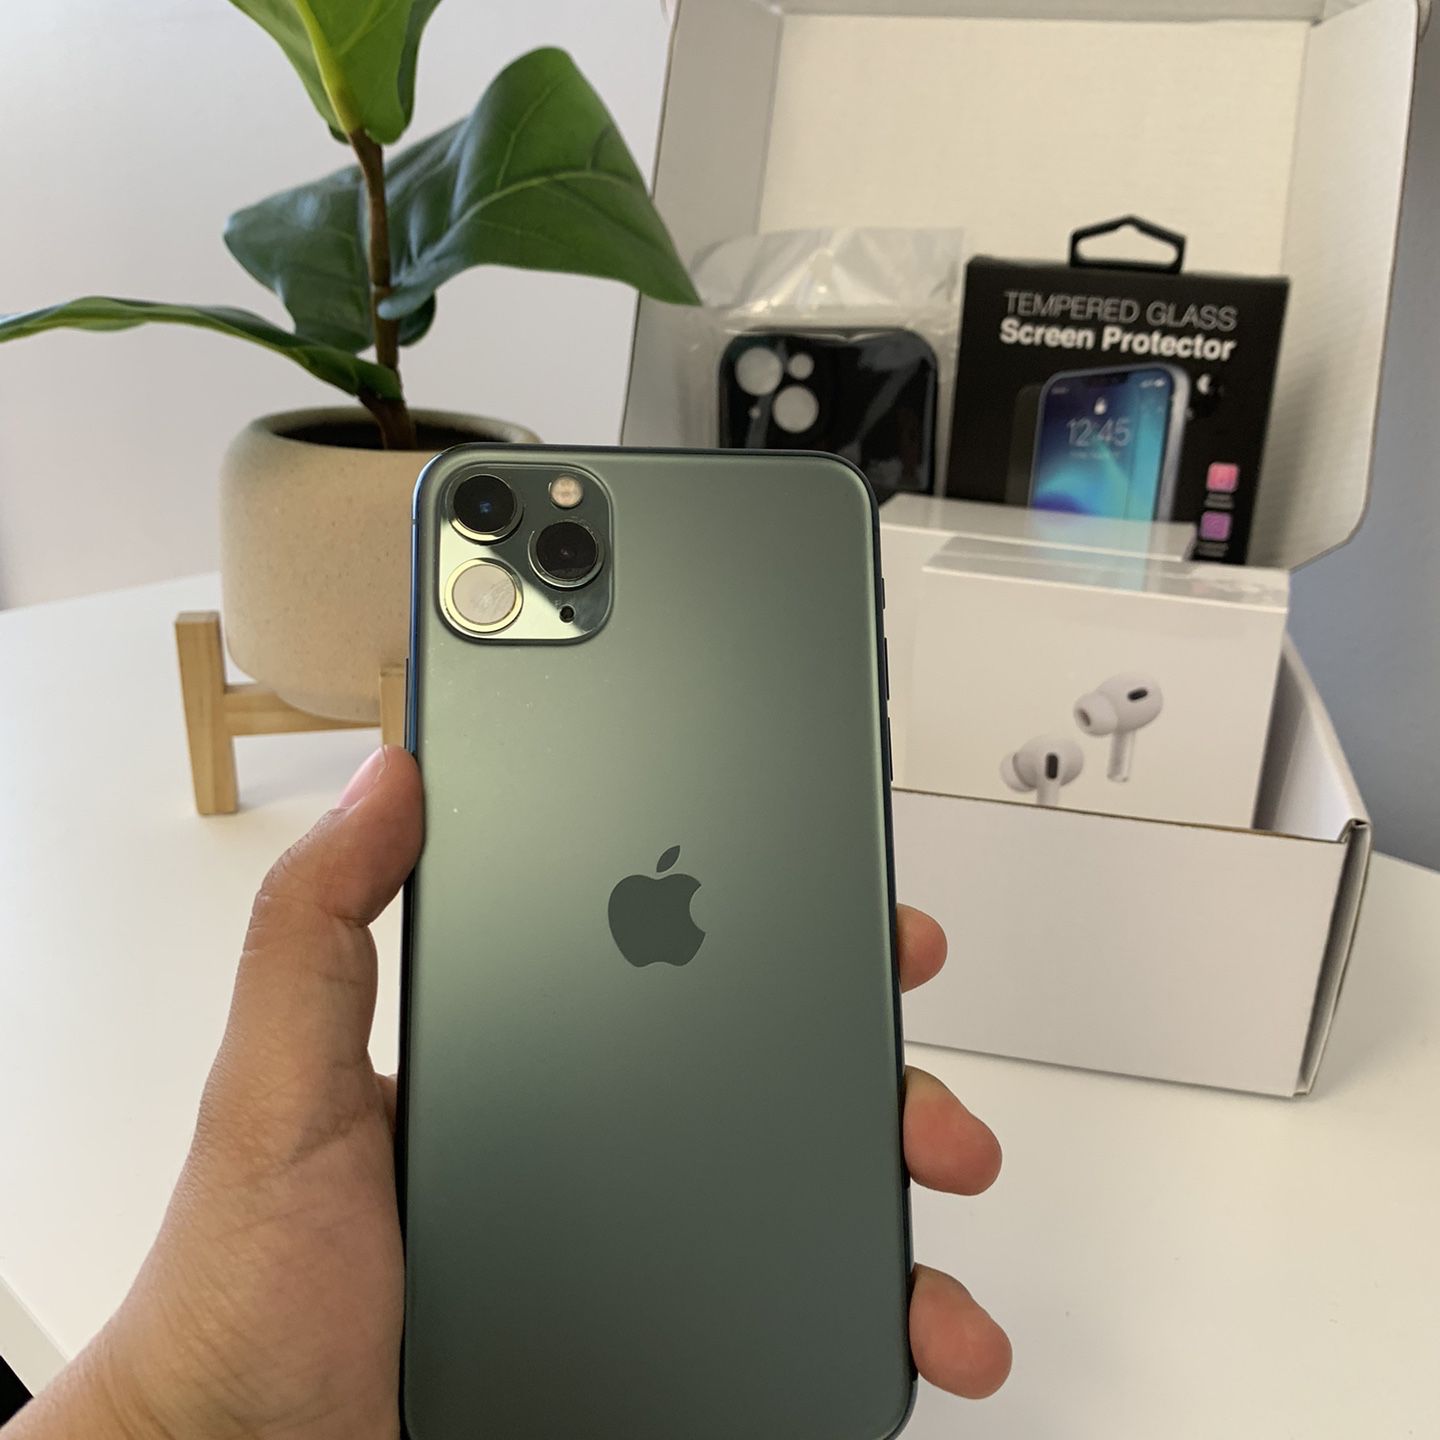 🍏📱 iPhone 11 Pro Max 64 GB Unlocked BH78% 🔋 Case And Headphones For Free 💚🍏